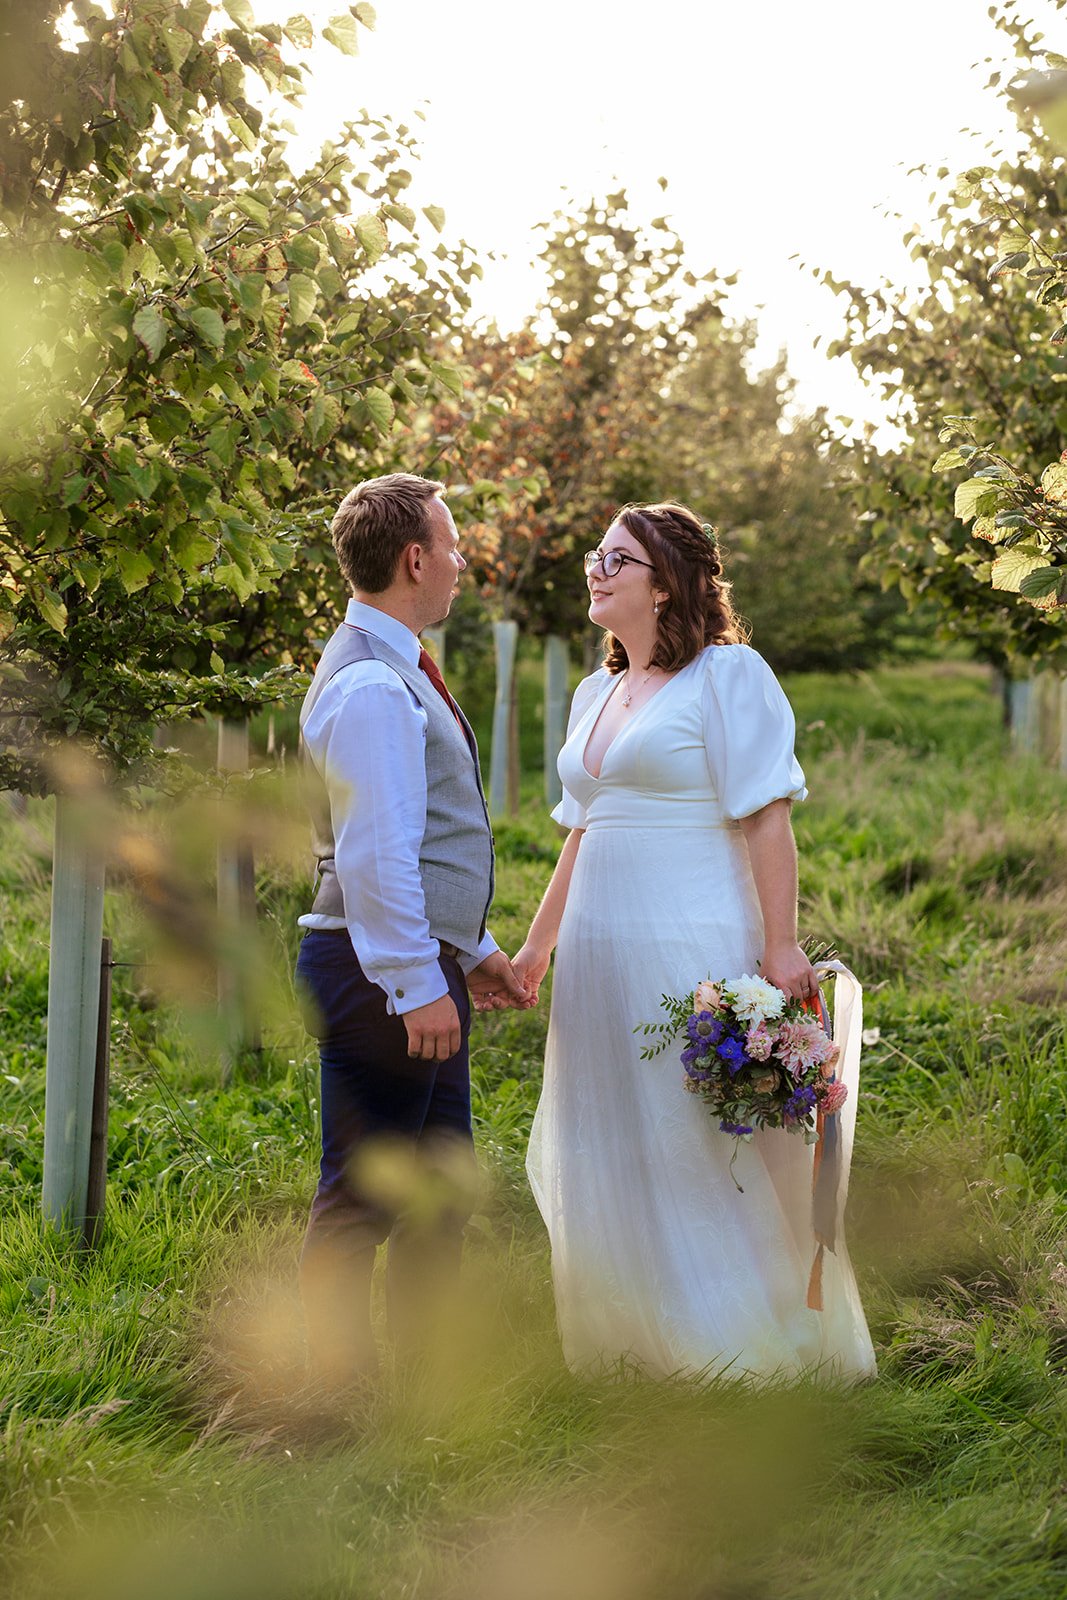 Newlywed couple photographed in a vineyard at golden hour